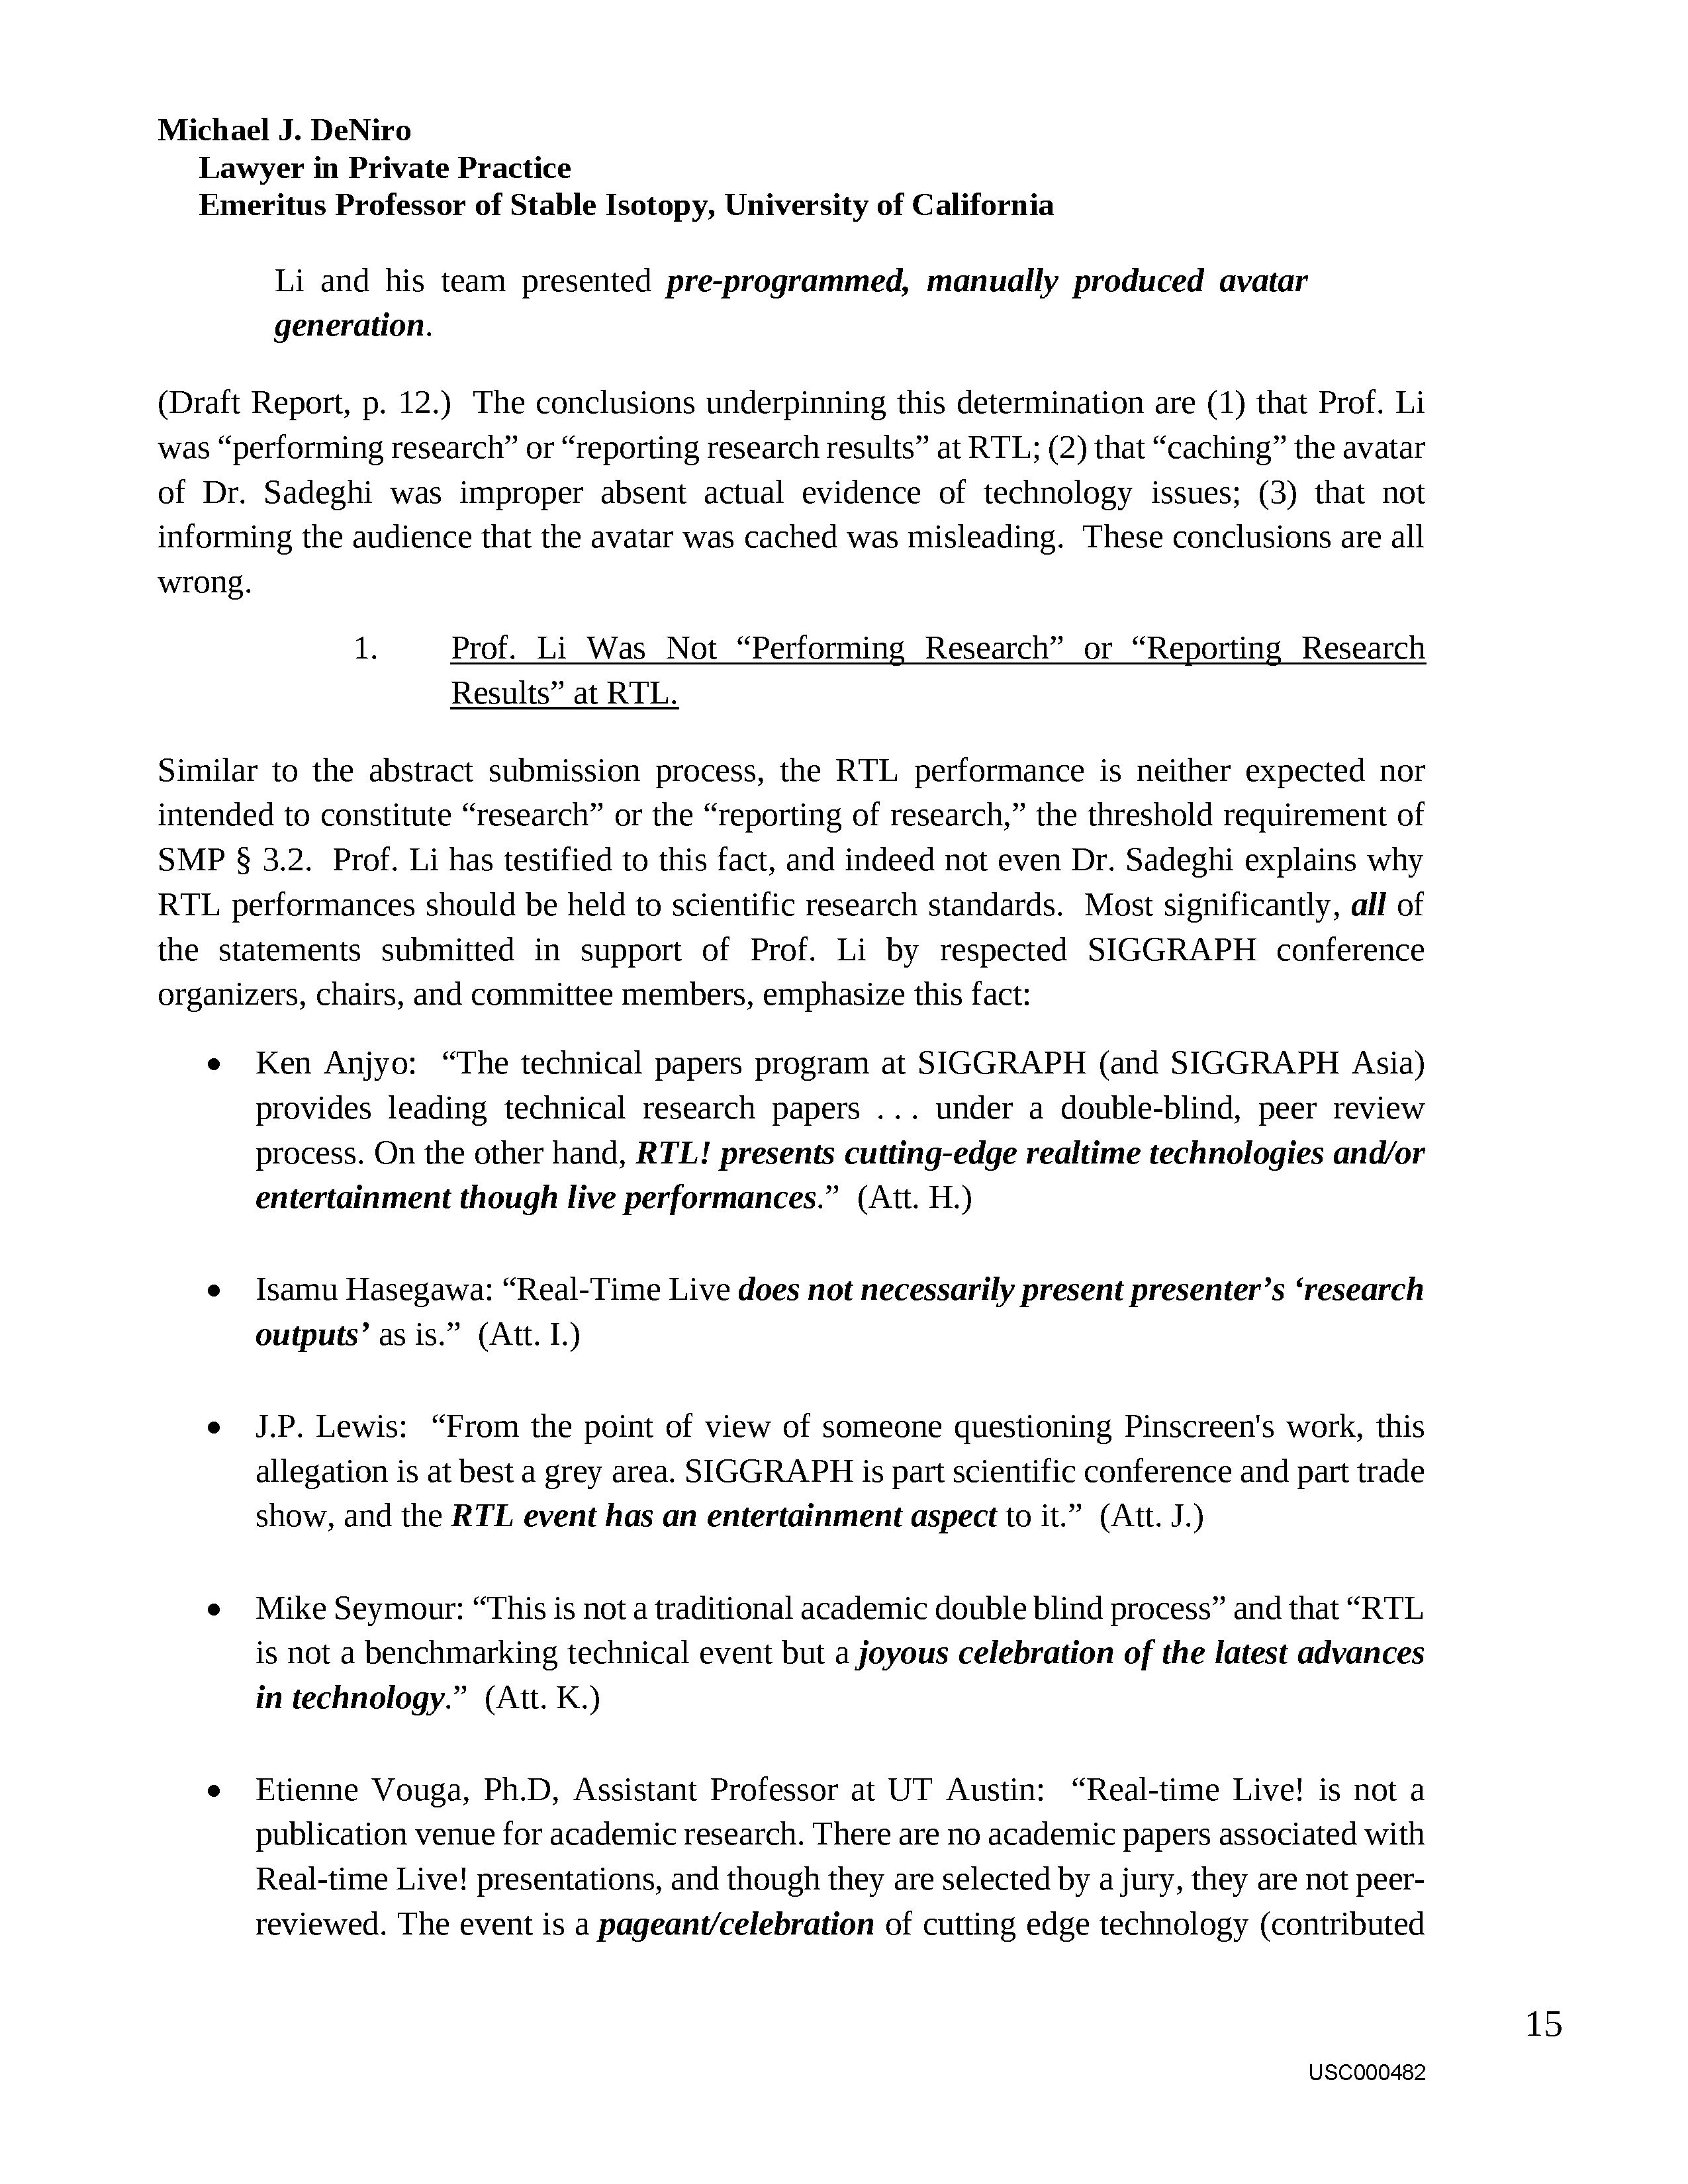 USC's Investigation Report re Hao Li's and Pinscreen's Scientific Misconduct at ACM SIGGRAPH RTL 2017 - Full Report Page 484